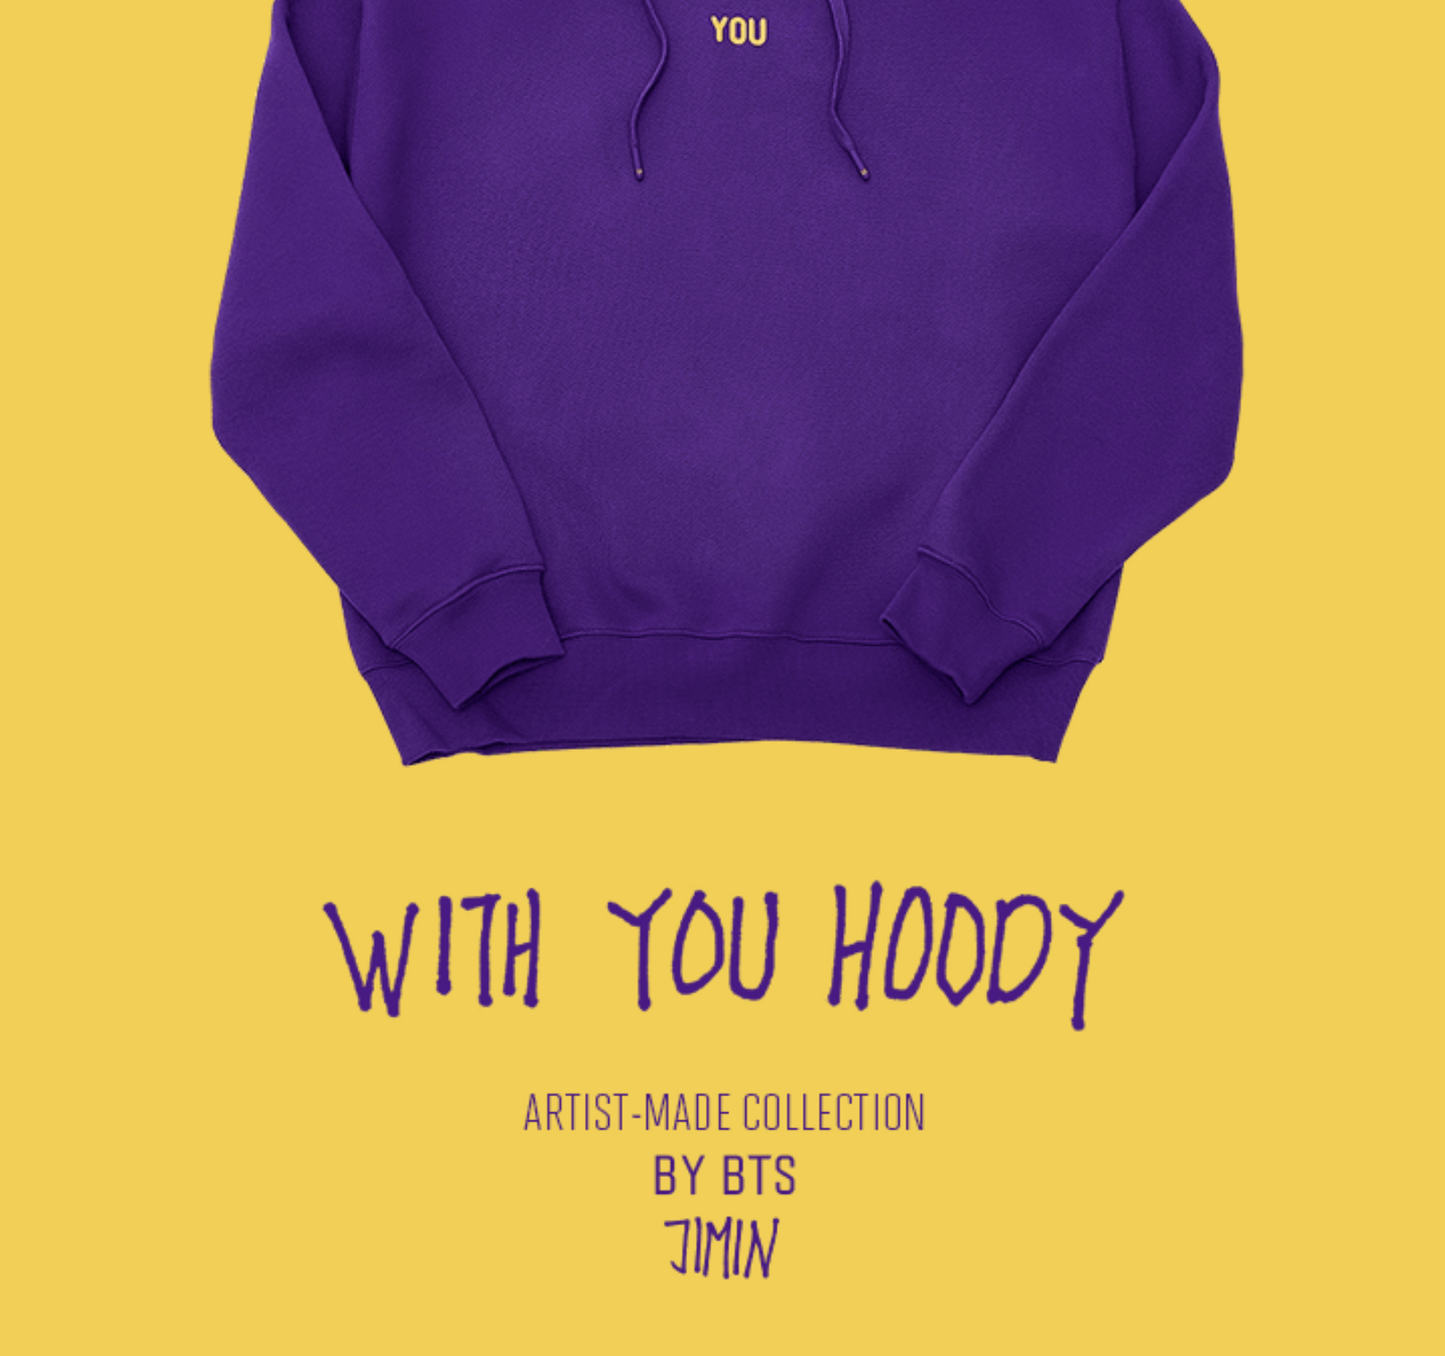 BTS JIMIN 'ARTIST-MADE' WITH YOU HOODIE